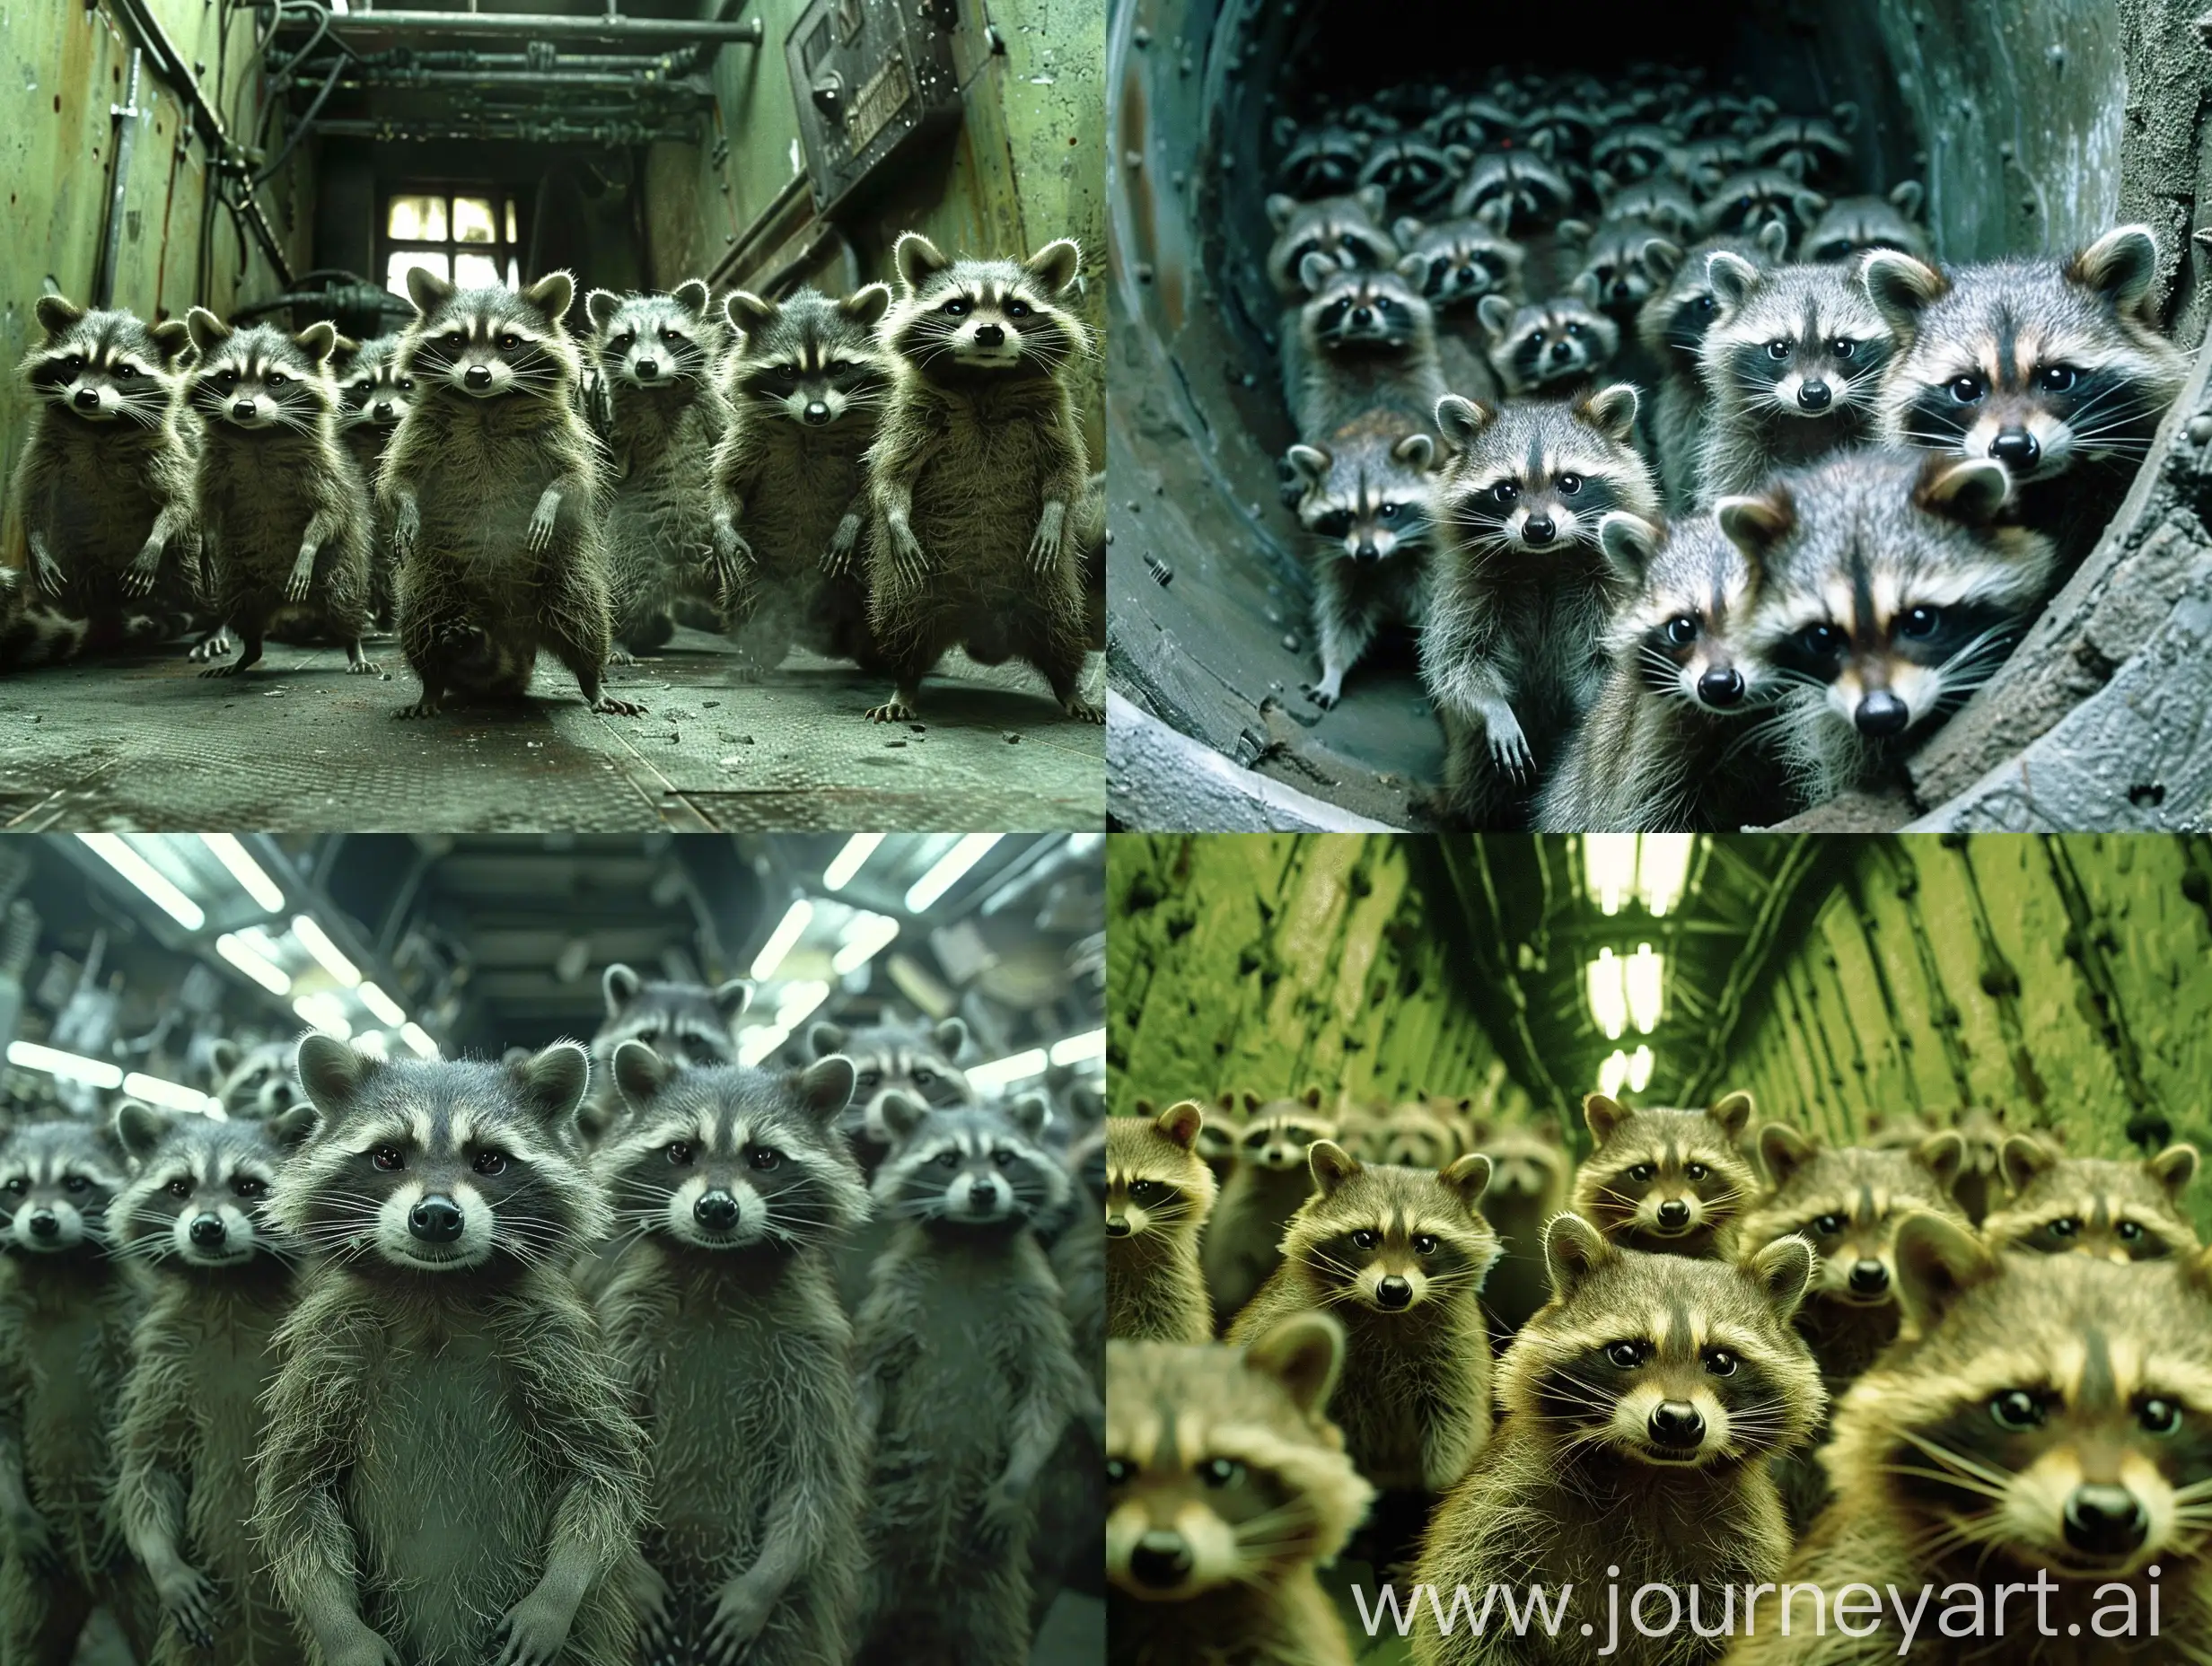 Imagine a shot from the movie "The Matrix" if raccoons played all the roles in it instead of people